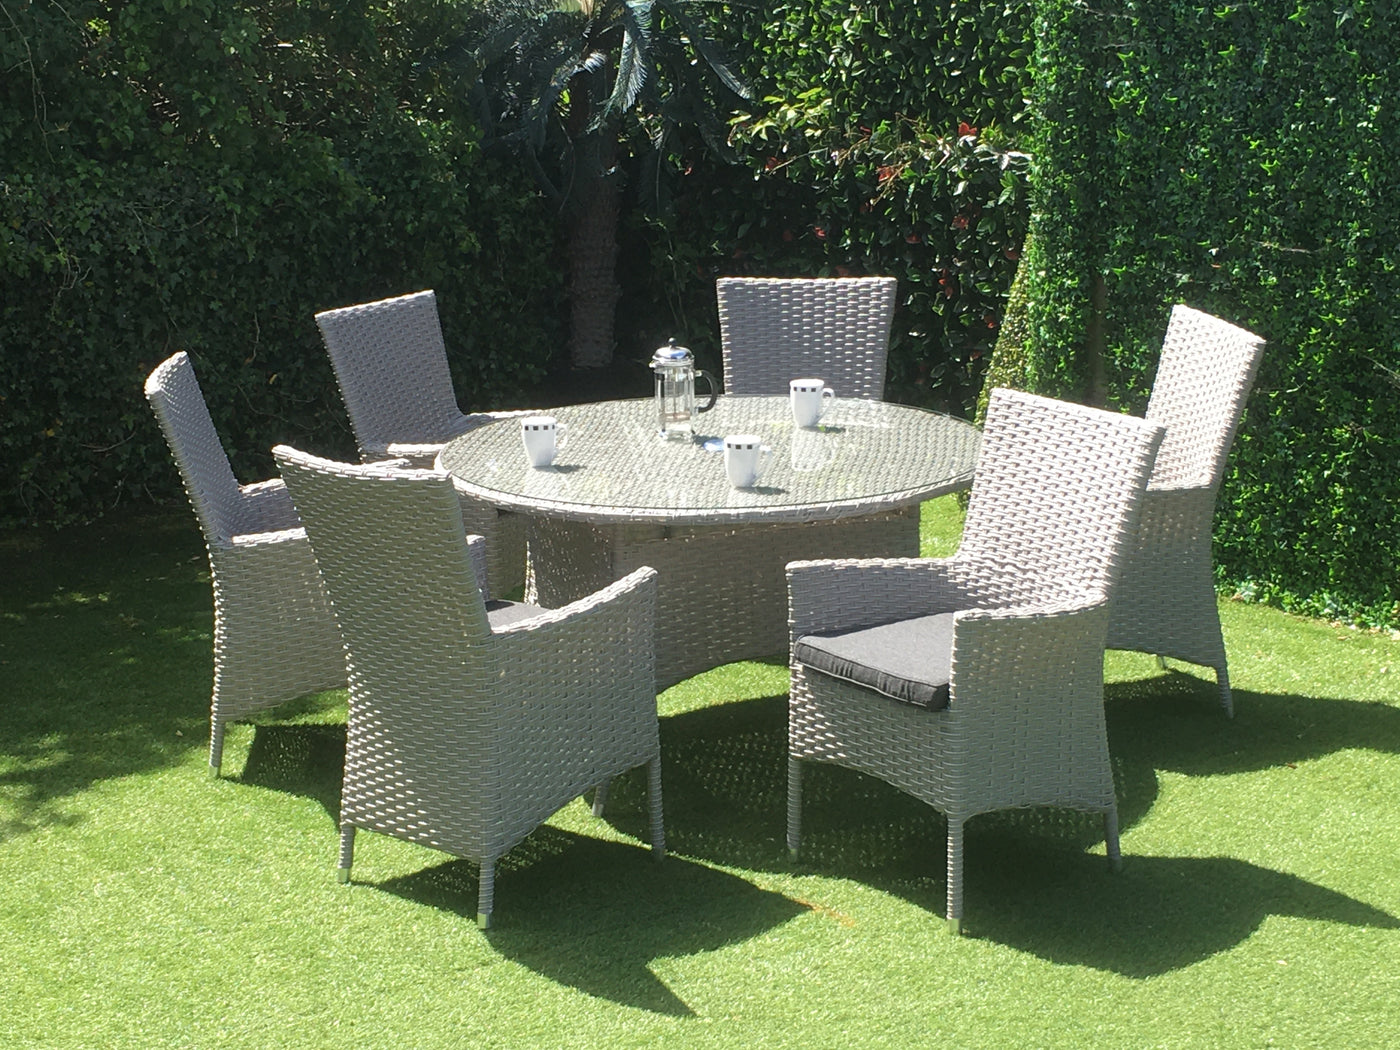 6 SEATER TABLE AND CHAIRS TEMPERED GLASS TABLE TOP WITH DOUBLE FLAT WEAVE - OUTDOOR FURNITURE